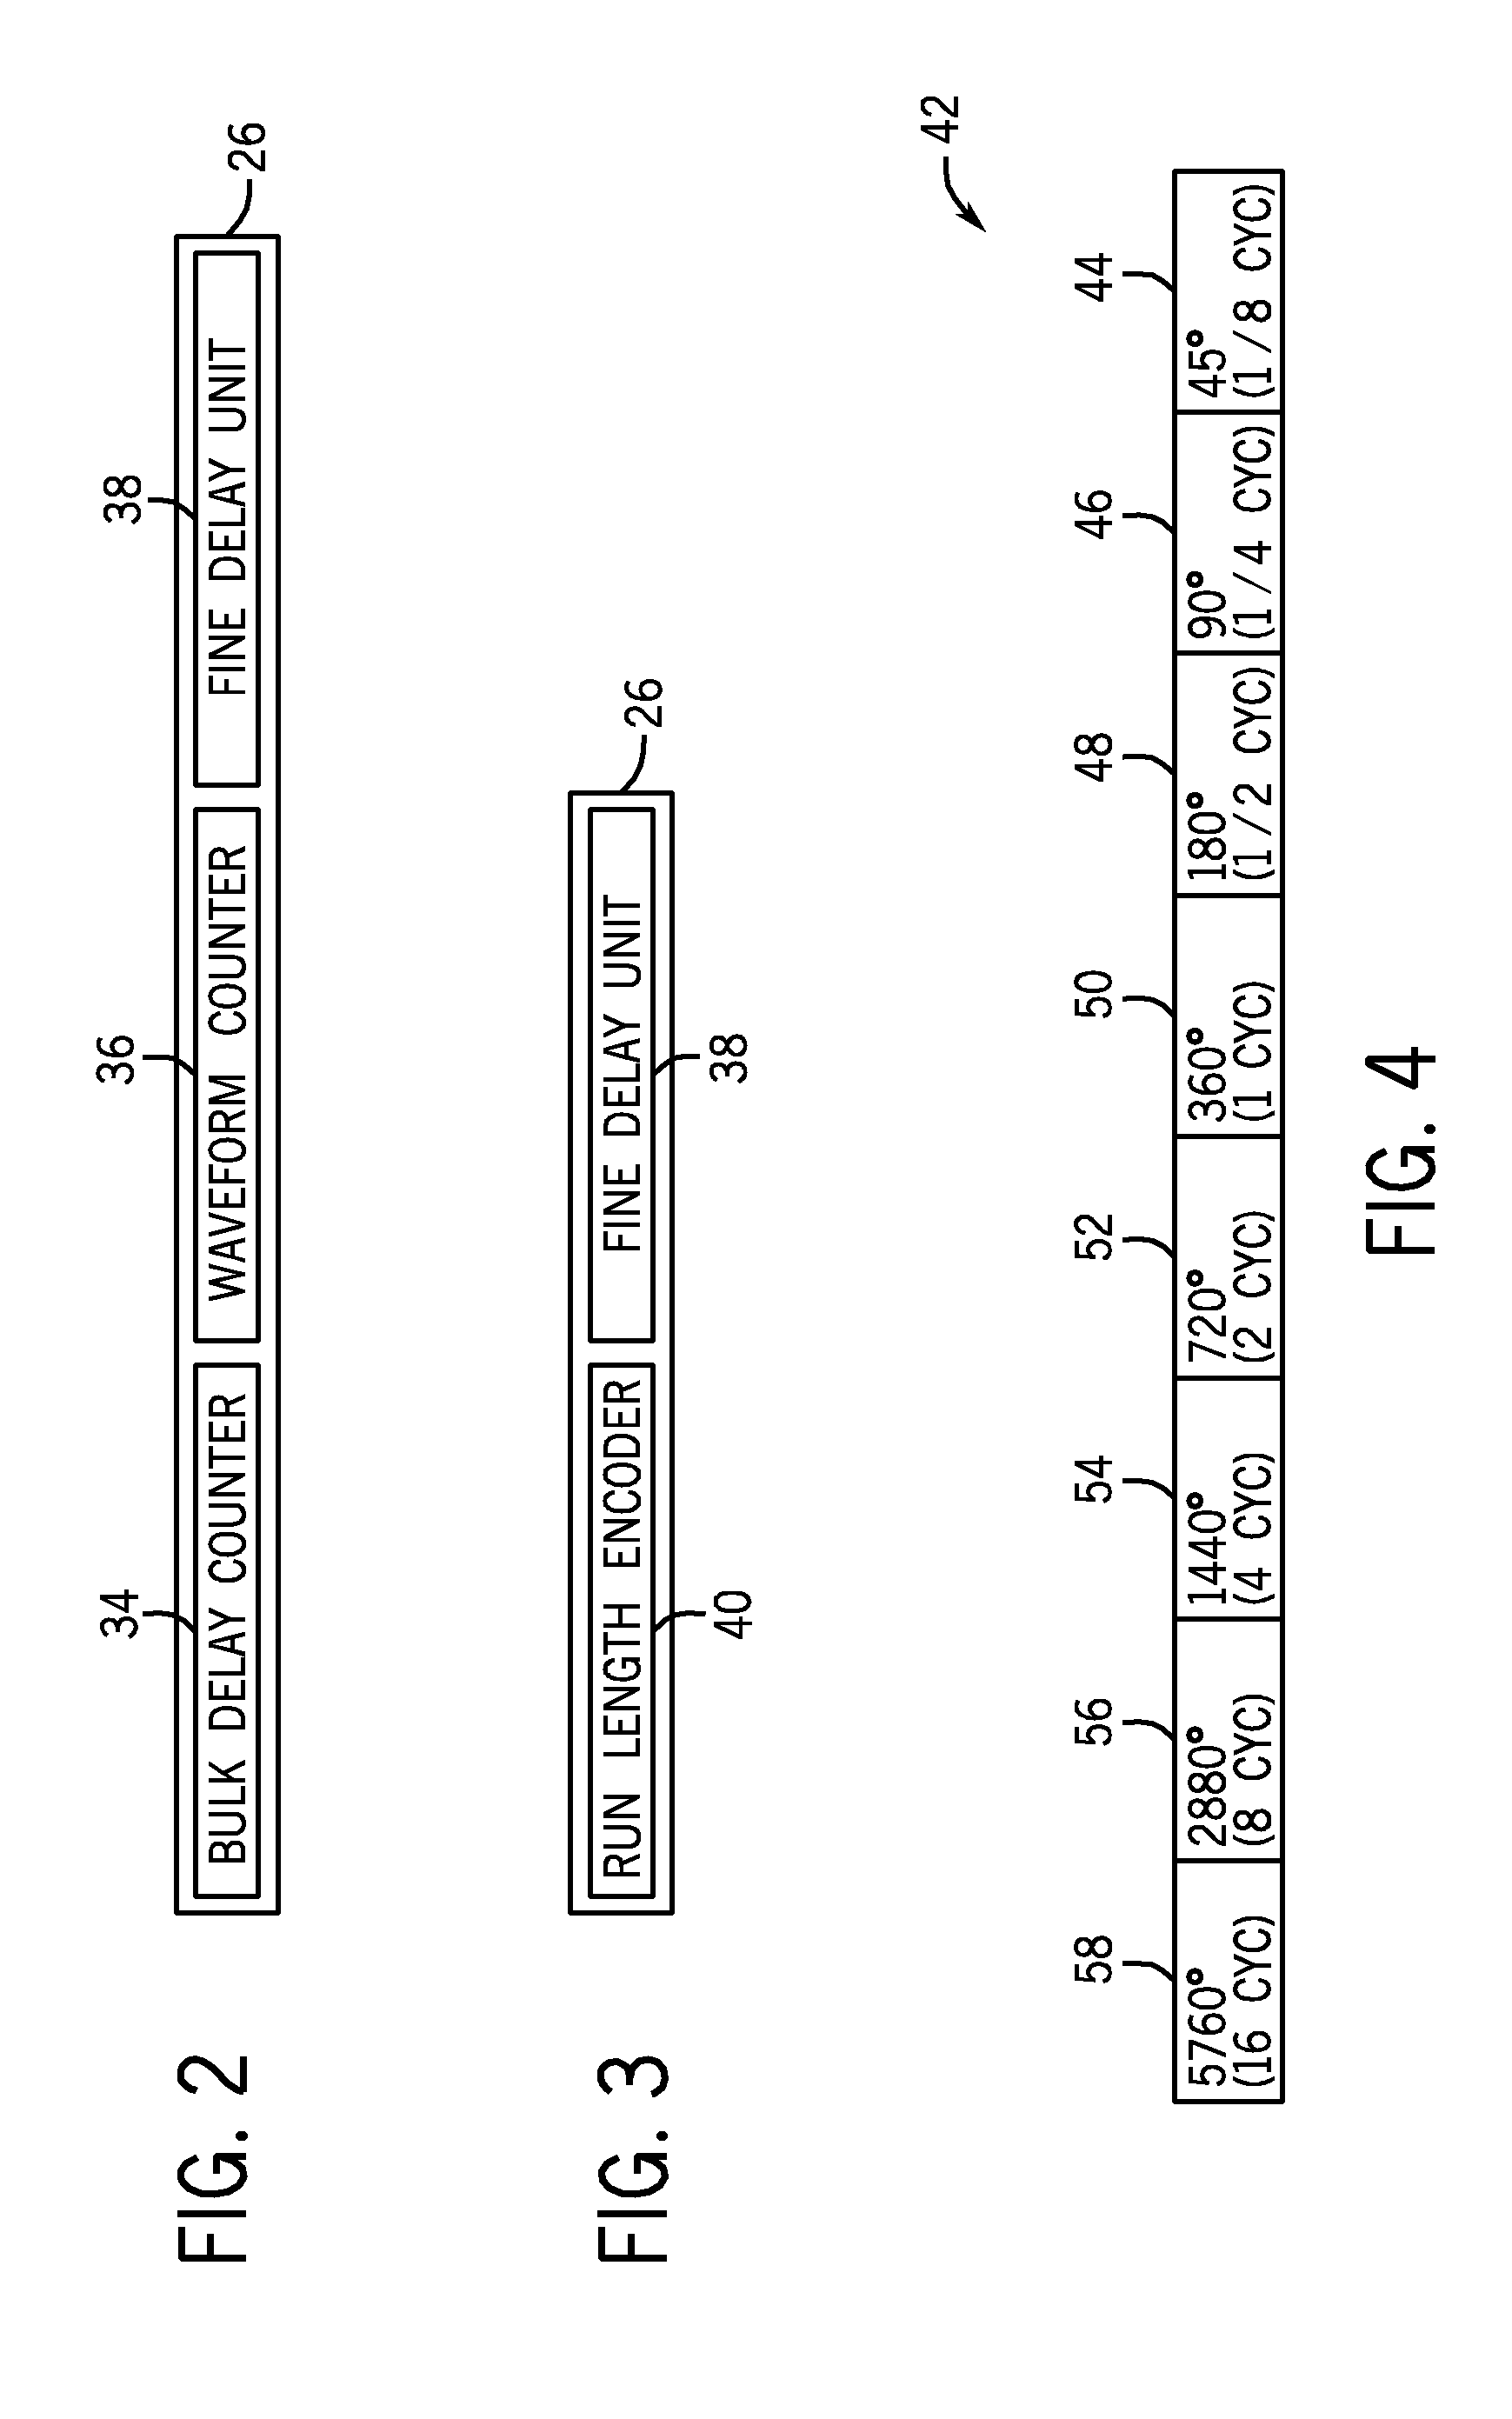 Ultrasound probe with integrated pulsers